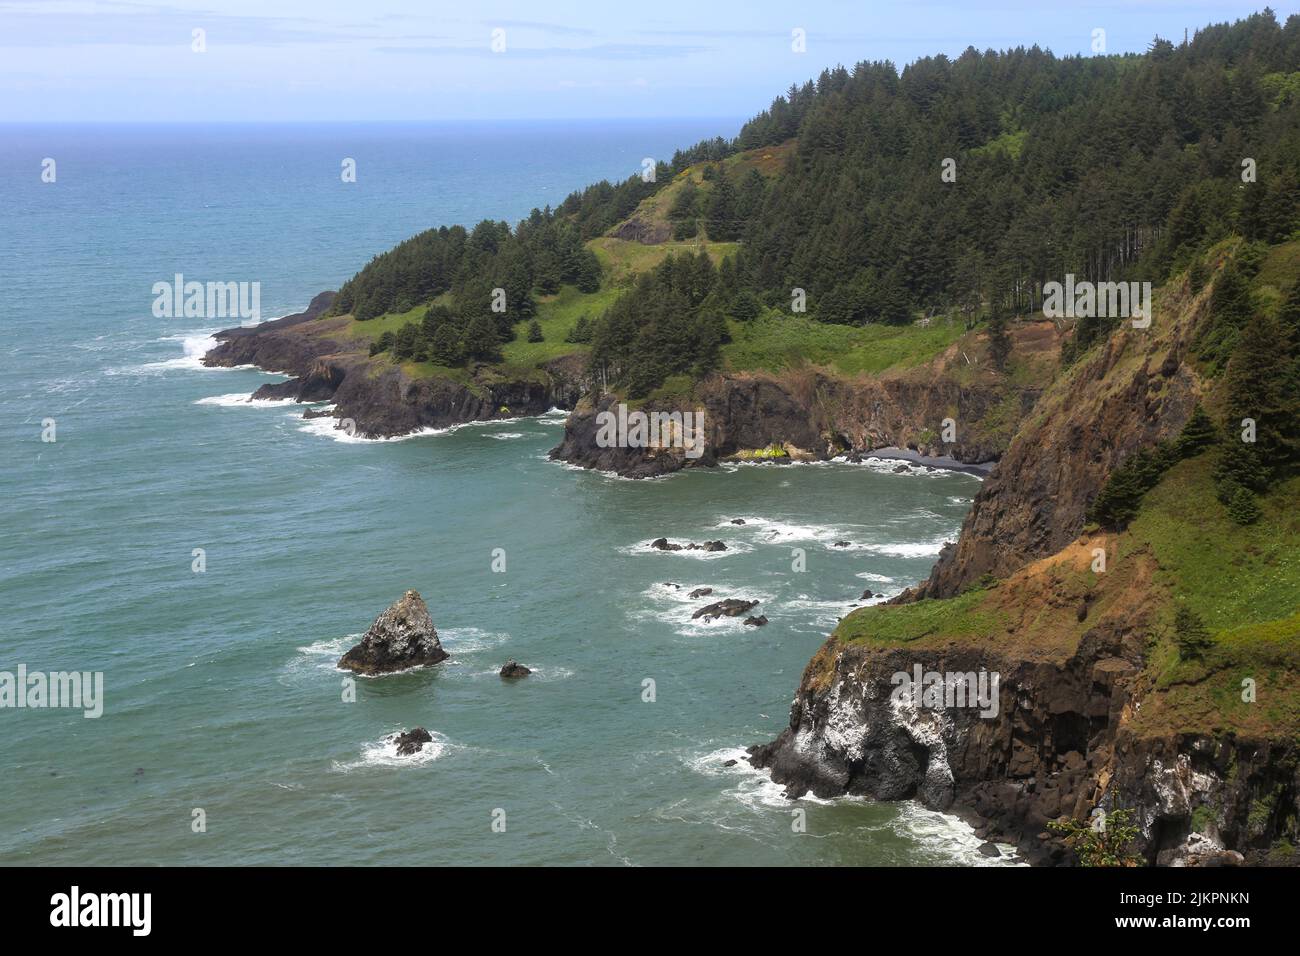 A scenic view of the Cape Foulweather Peninsula Stock Photo